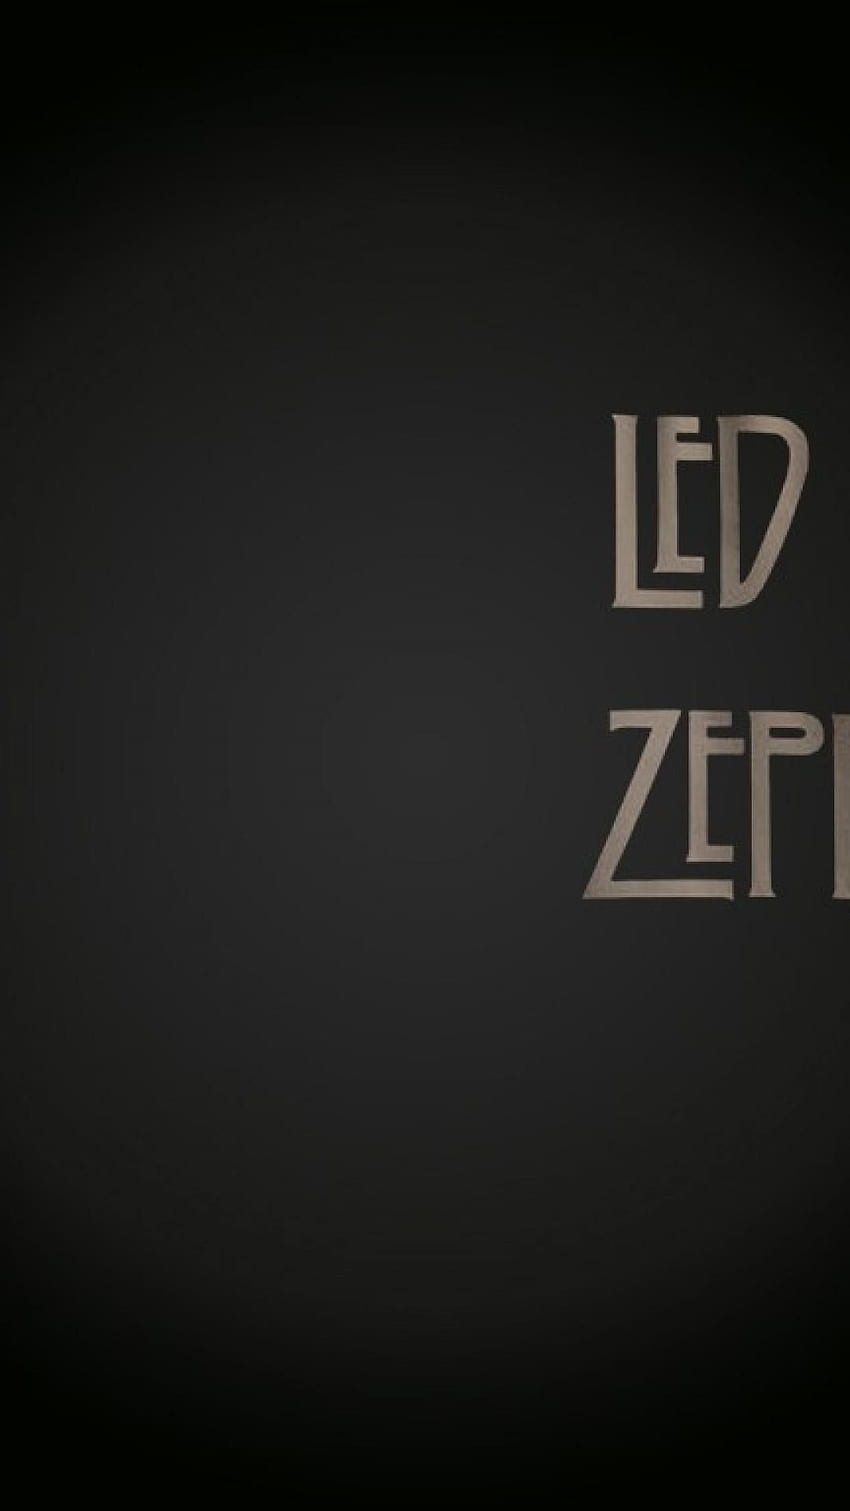 I made a phone wallpaper based of of the Icarus logo  rledzeppelin